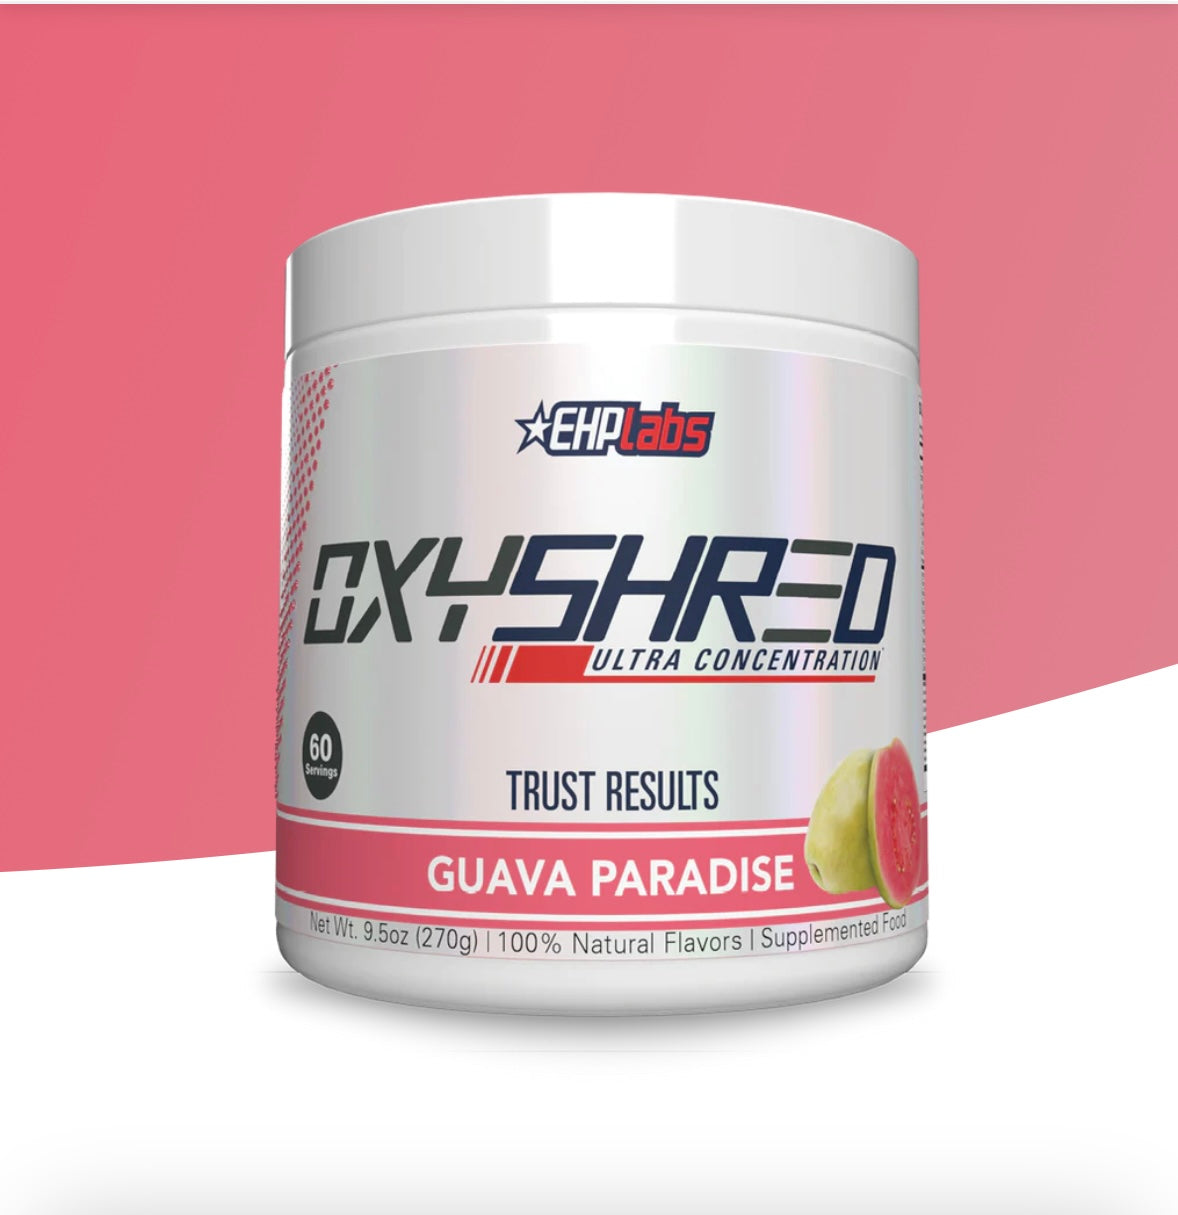 OxyShred Ultra Concentration - Guava Paradise